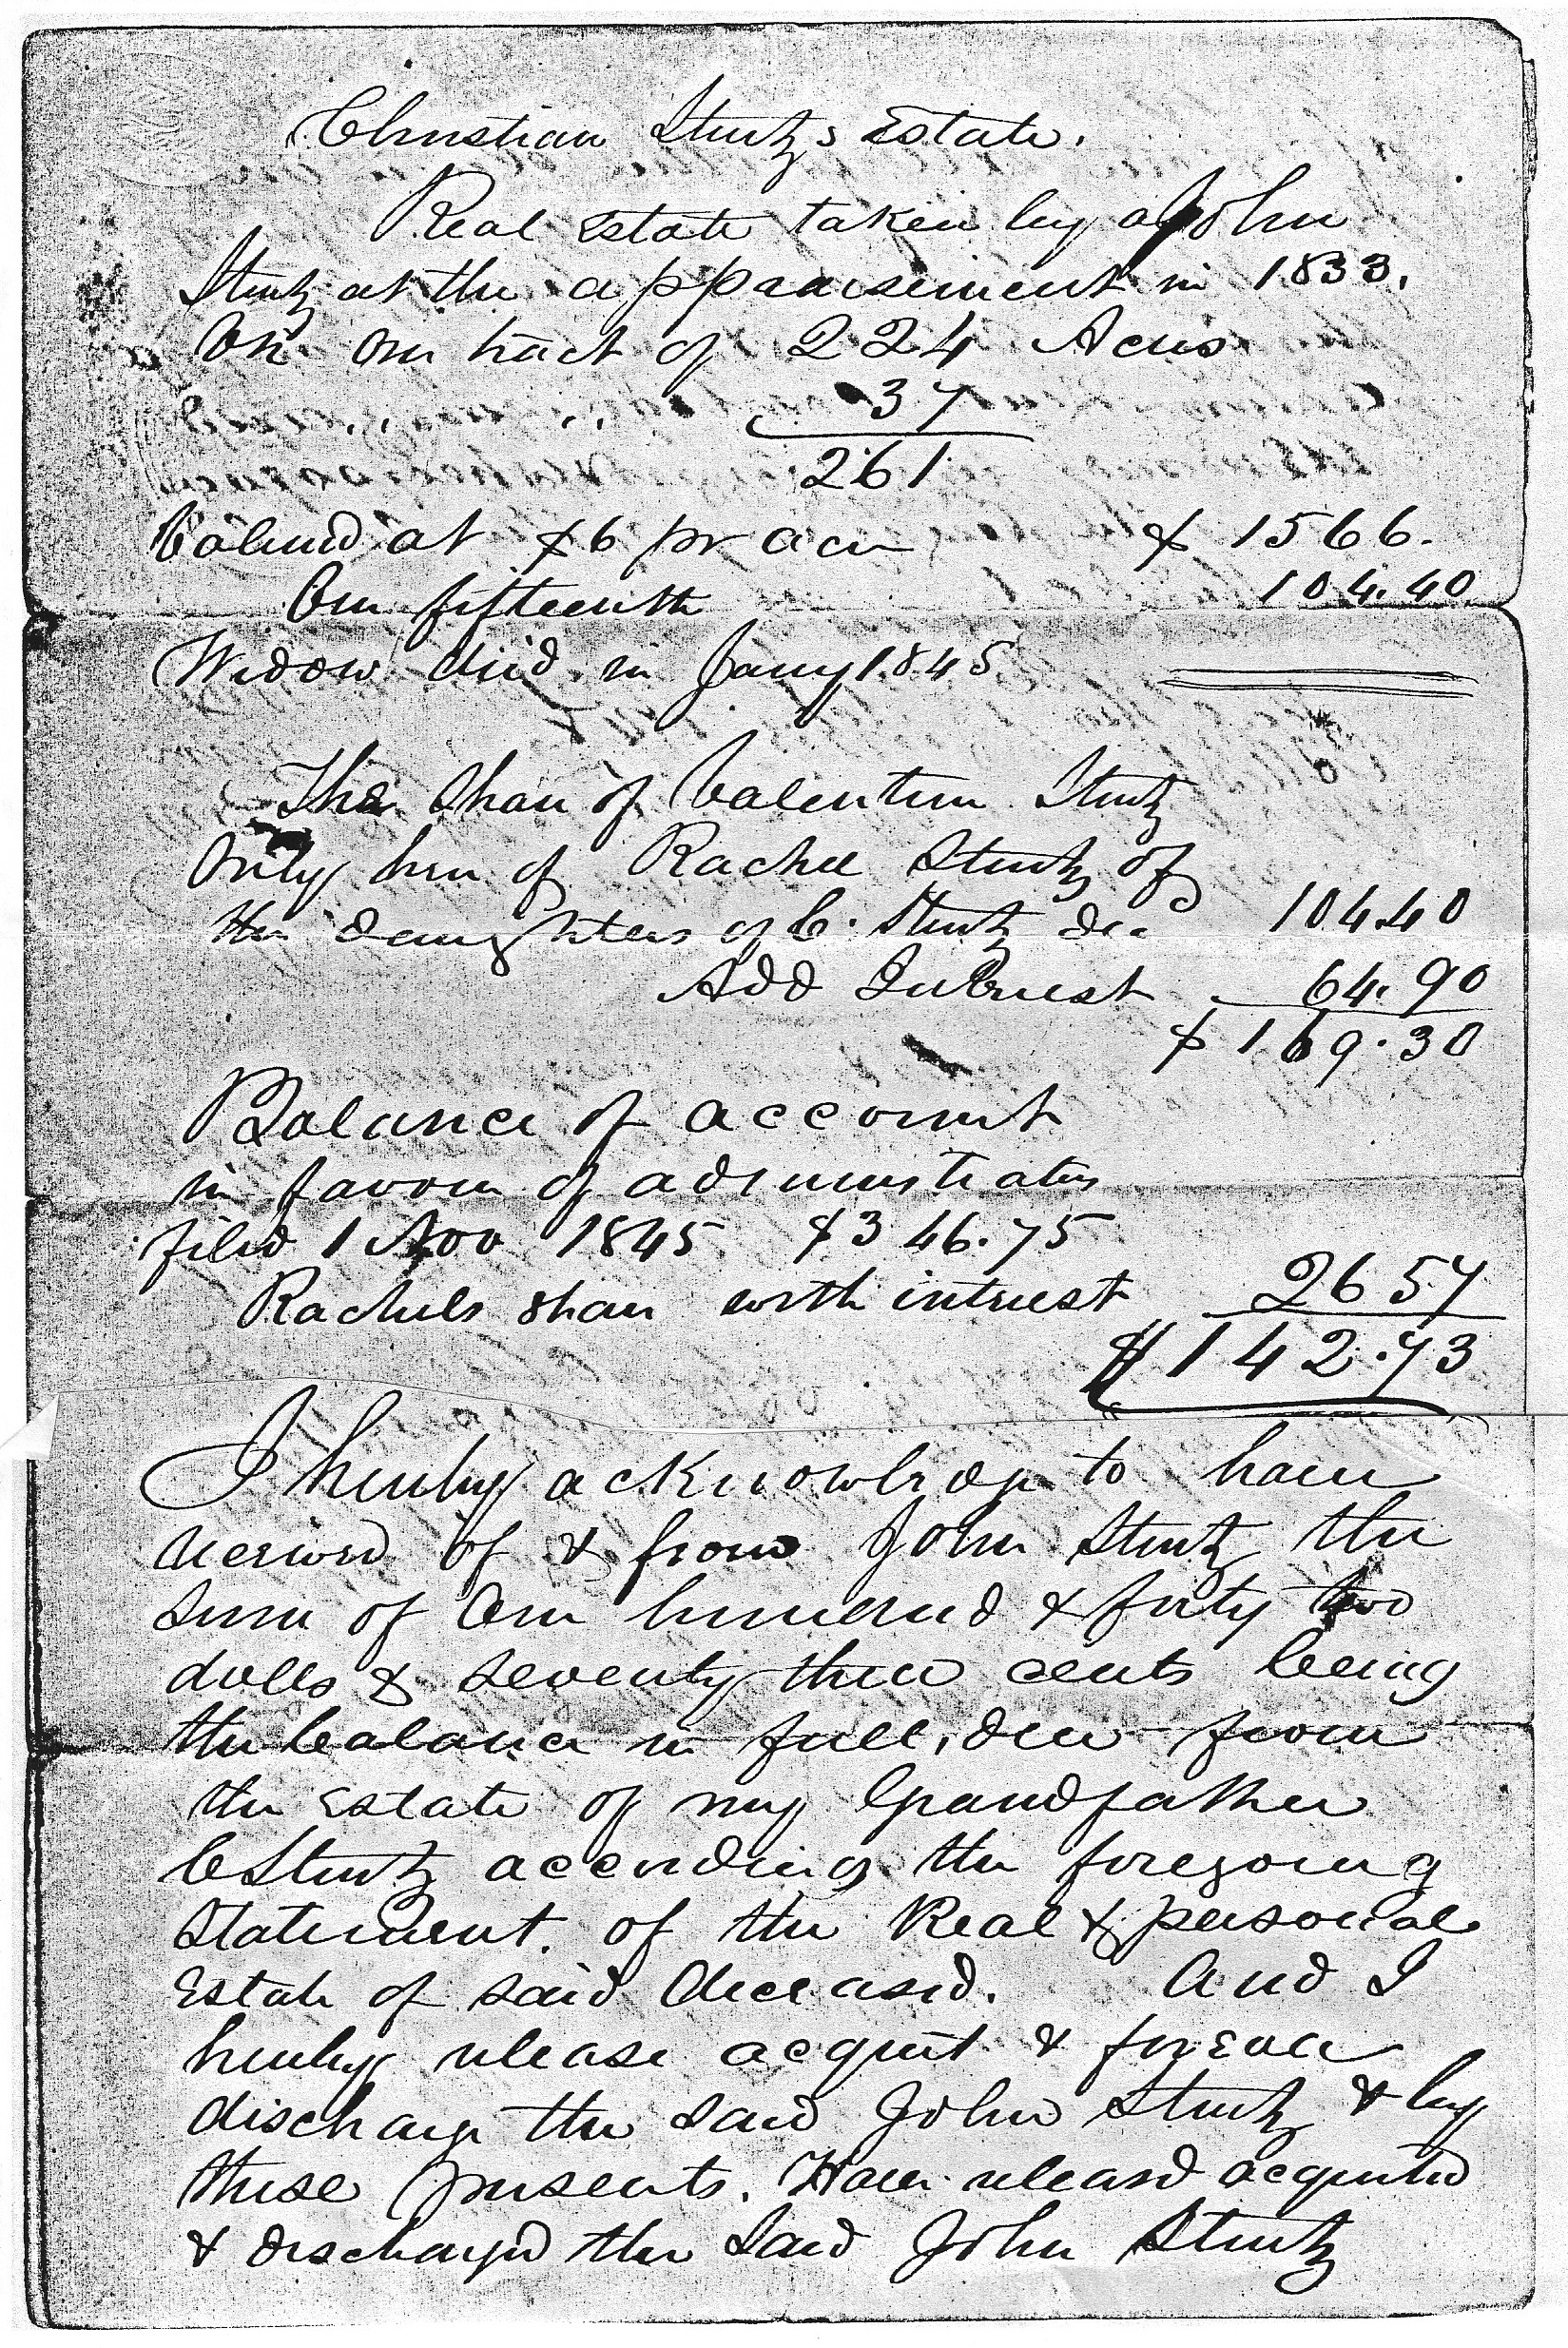 The first page of a document related to the estate of Christian Sturtz, Jr. of Southampton Township, Somerset County, Pennsylvania.